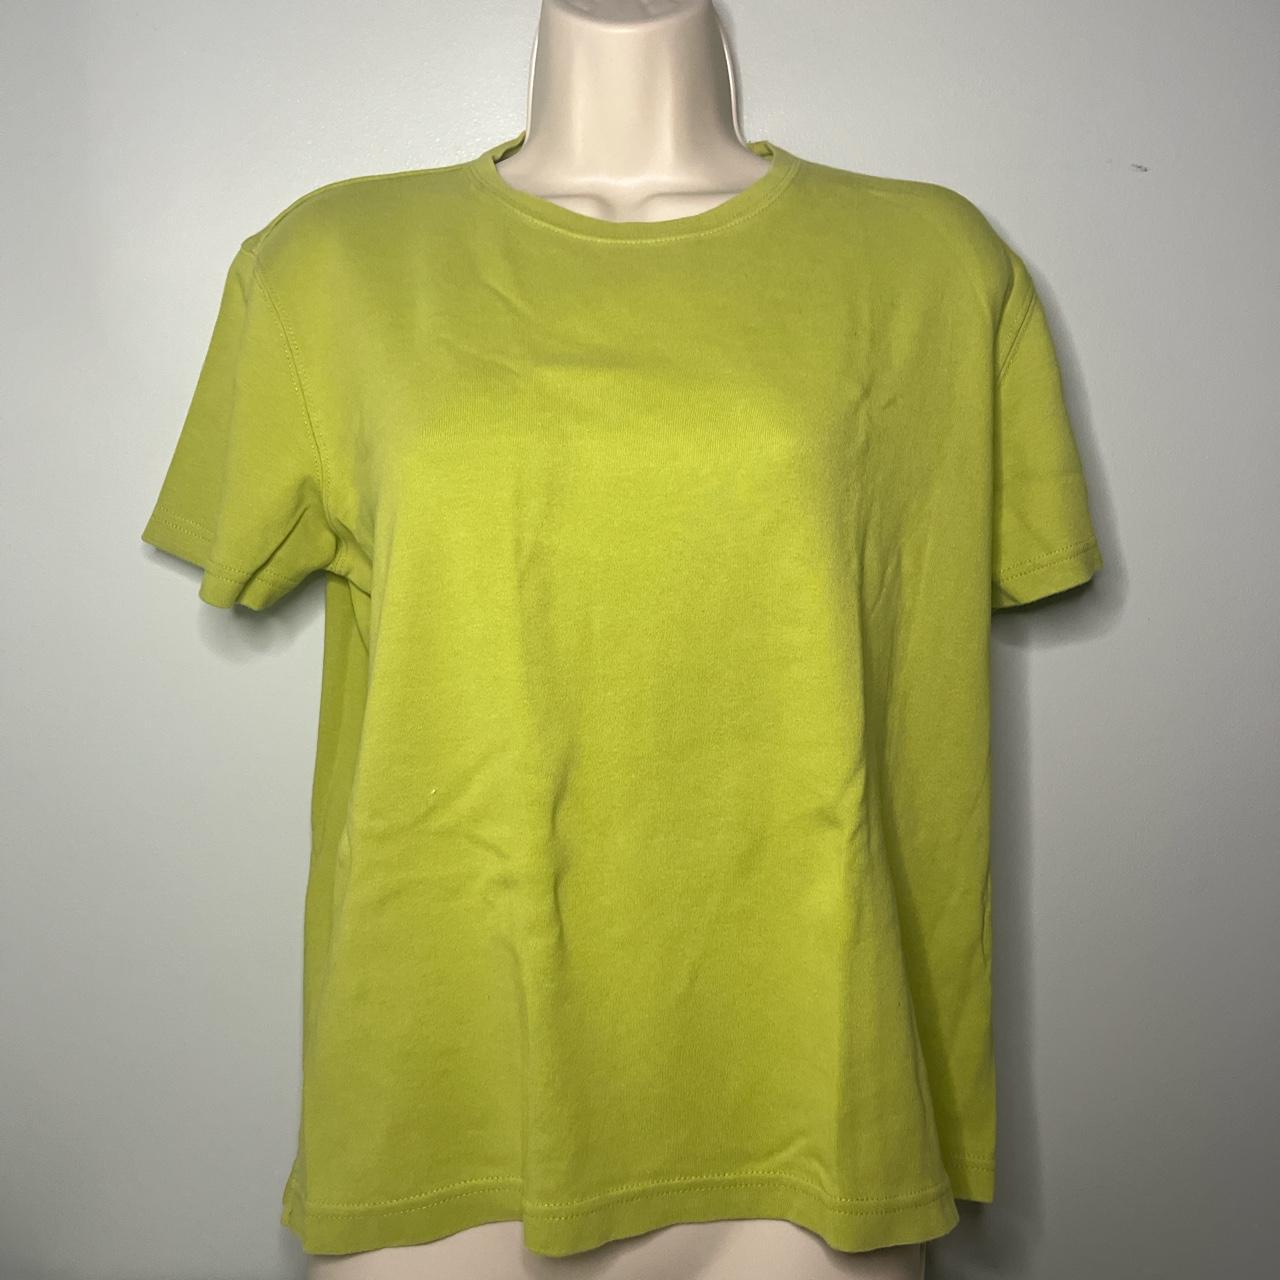 Green t-shirt in pristine condition. Pair with baggy... - Depop